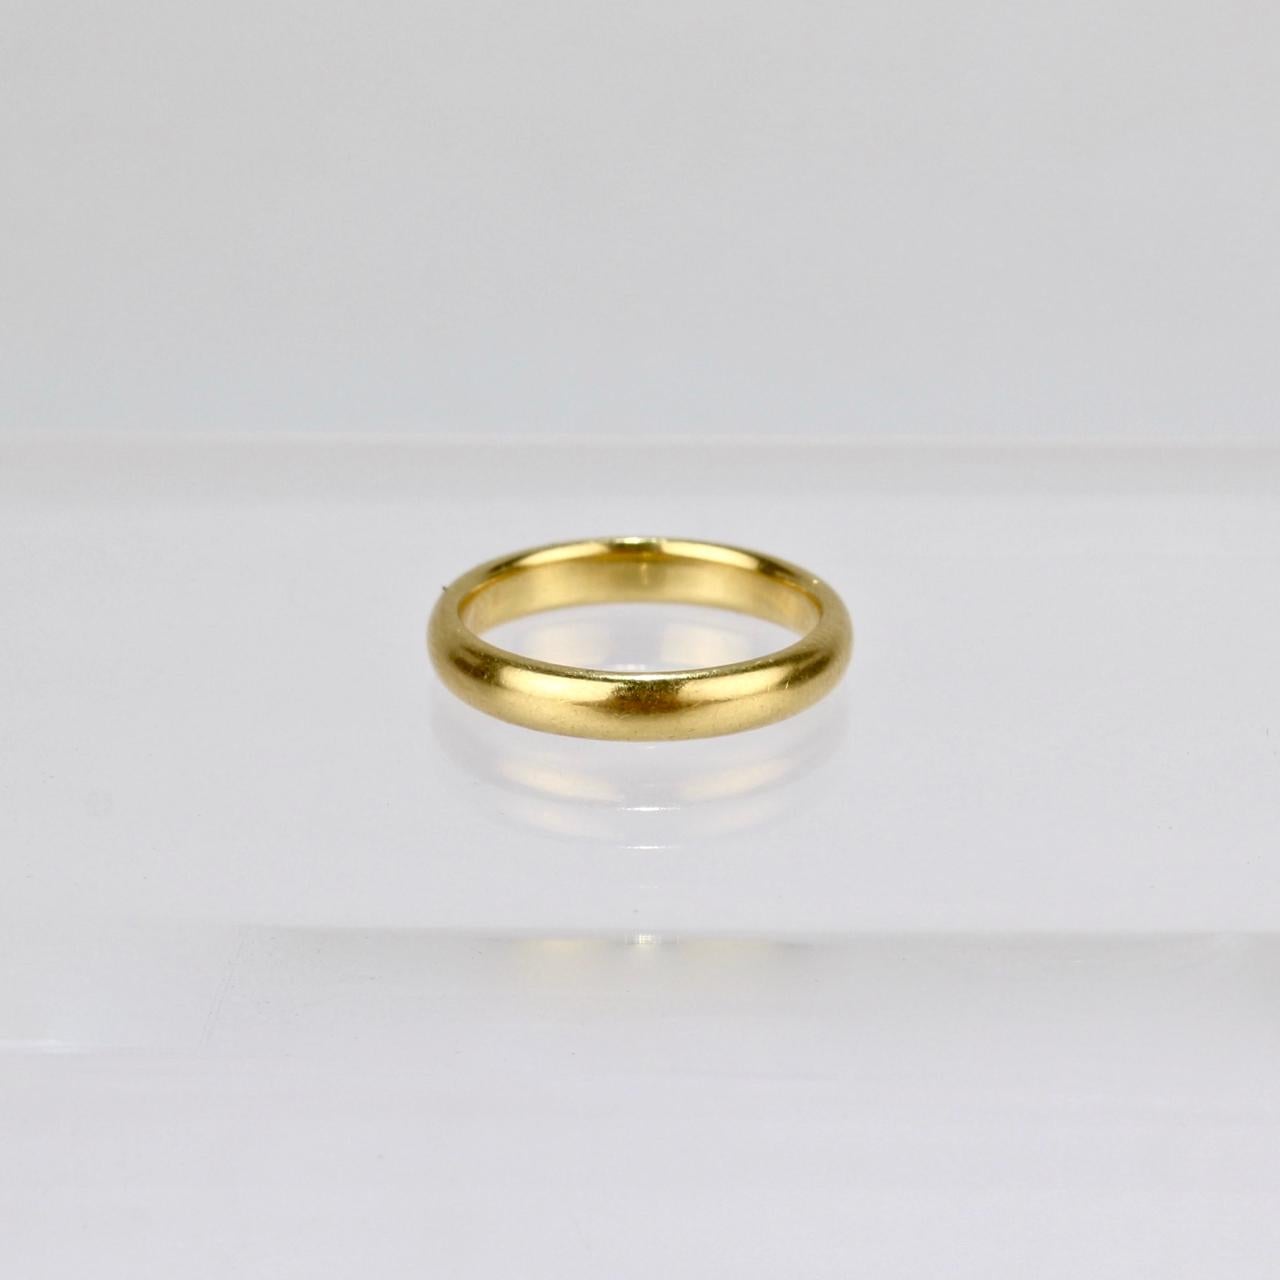 A very fine Tiffany & Co. 22-Karat yellow gold ring.

A single band perfect in its simplicity.

An ideal wedding band (or even everyday ring).

Width: ca. 3 mm
Overall Diameter: 19mm
Ring Size (on a mandrel): ca. 5.5-5.75

The interior is stamped: